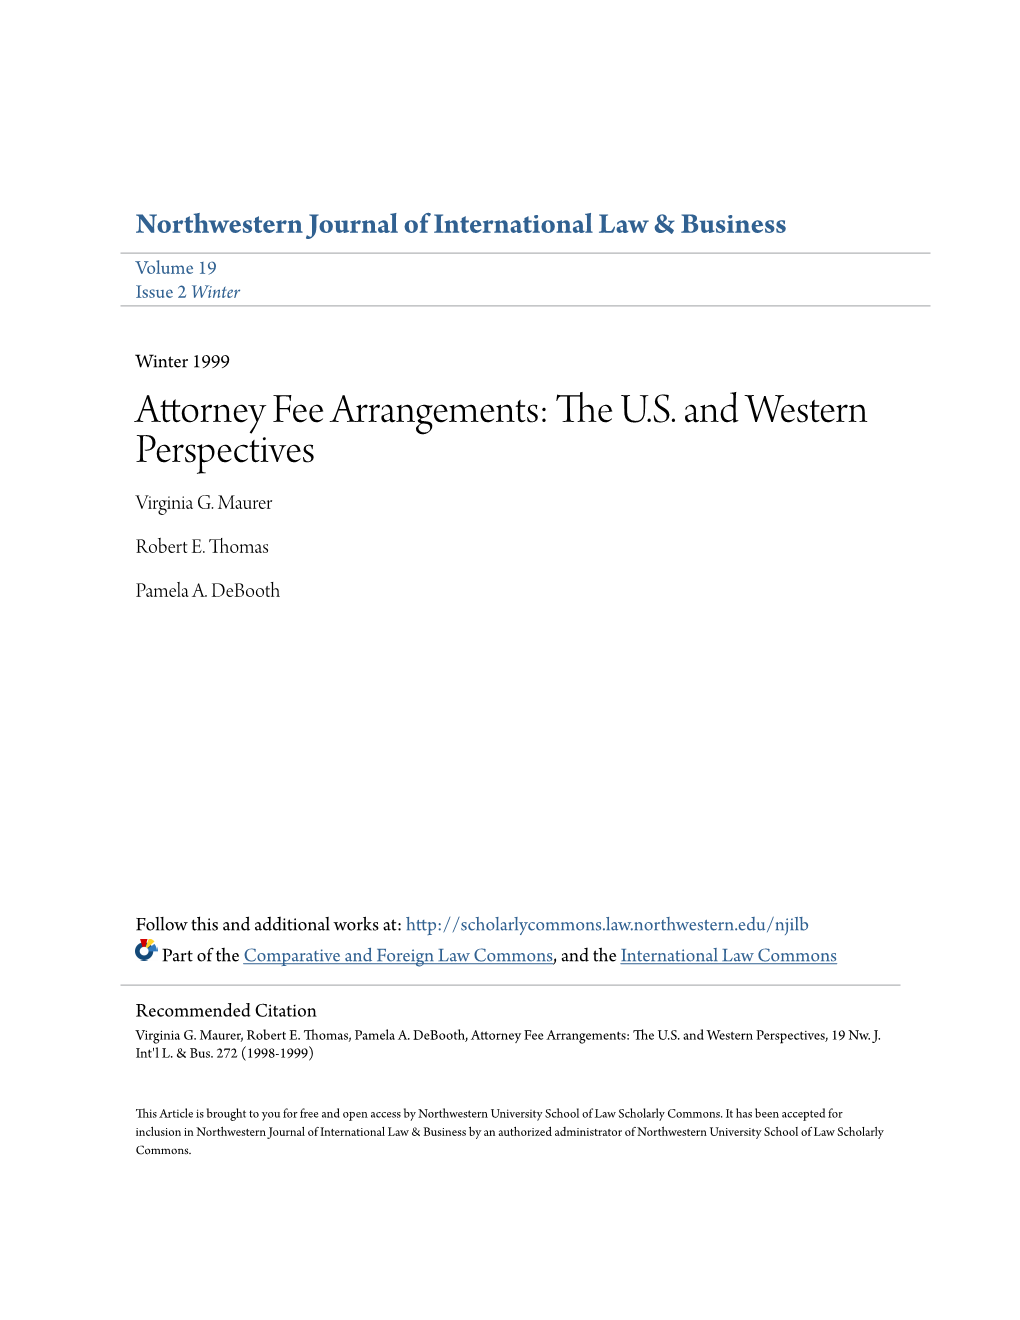 Attorney Fee Arrangements: the U.S. and Western Perspectives